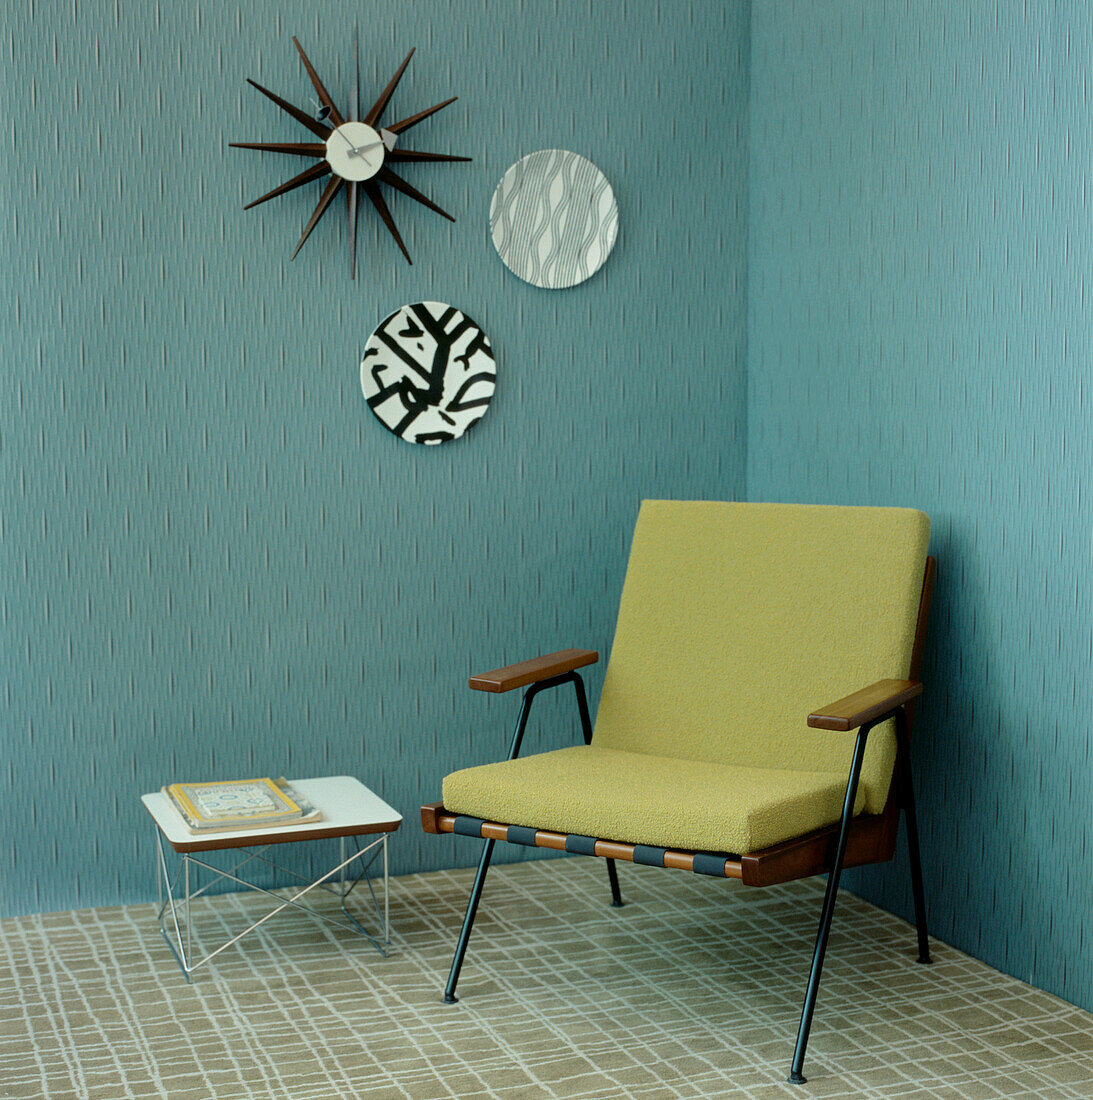 Green and turquoise contemporary Art Deco style living room detail with textured wallpaper armchair and home wares